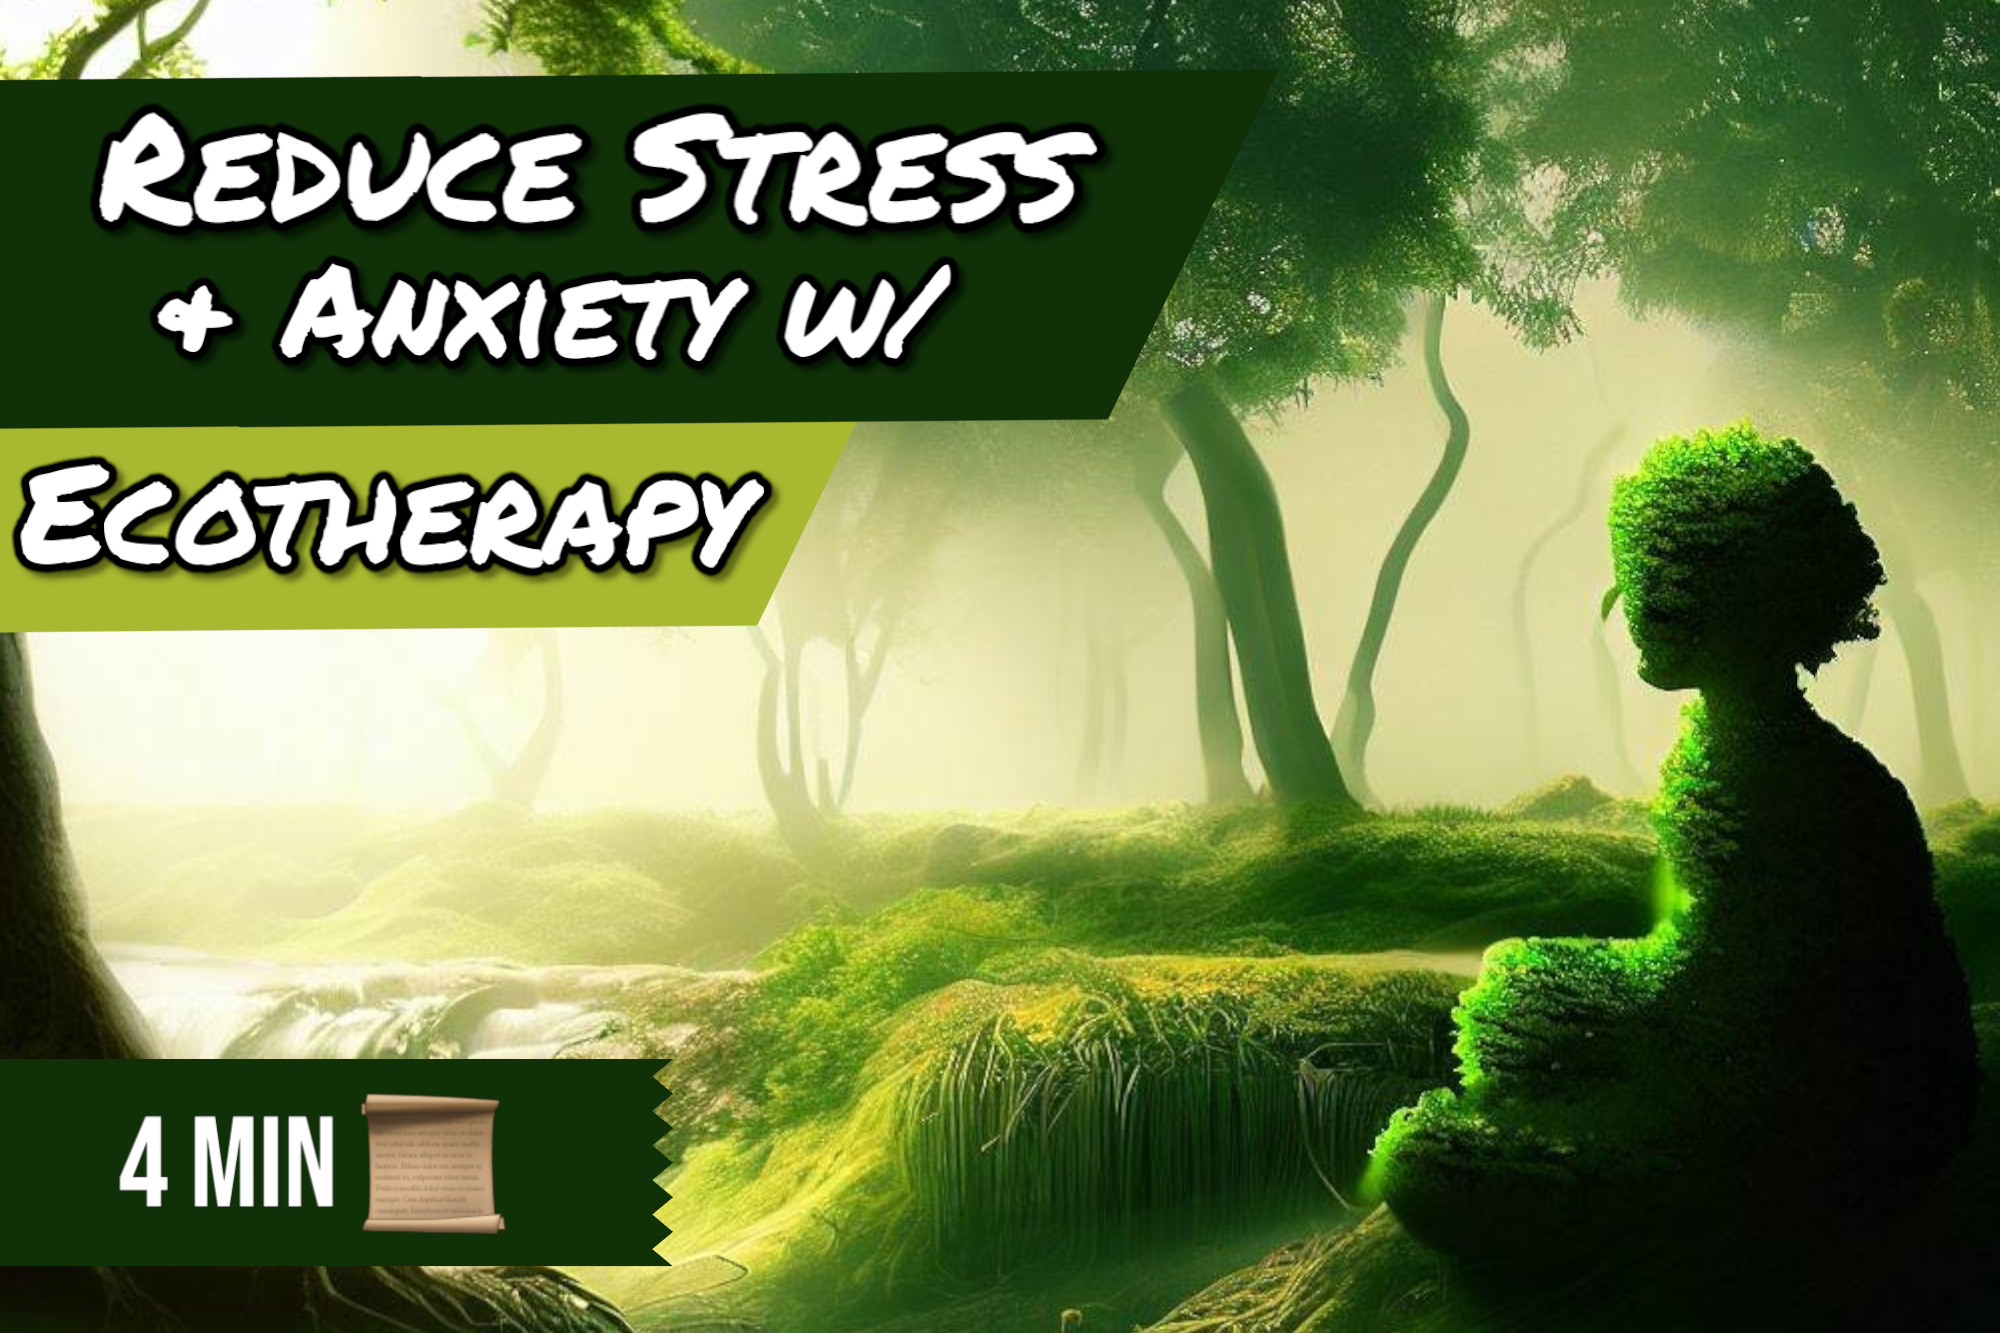 Reducing Stress and Anxiety Through Ecotherapy